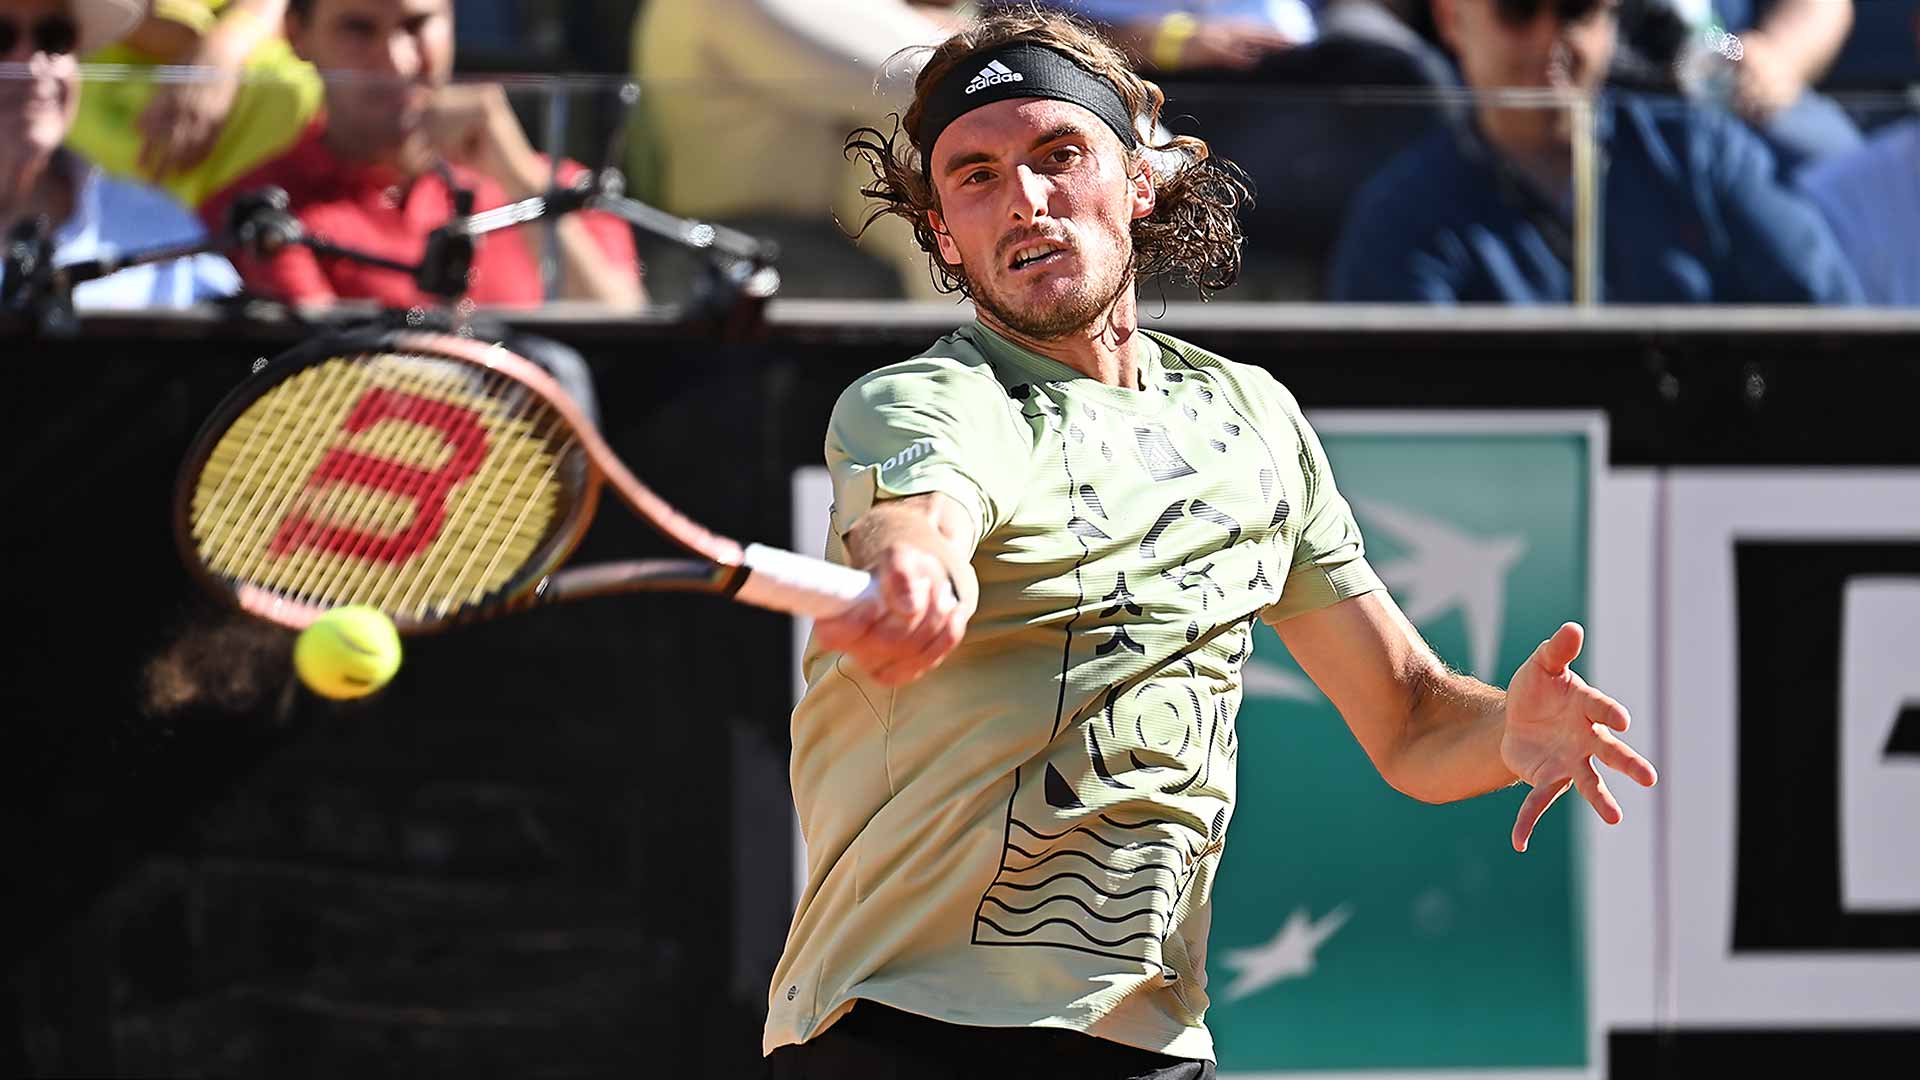 Stefanos Tsitsipas averages a shot quality of 8.0 on his forehand.